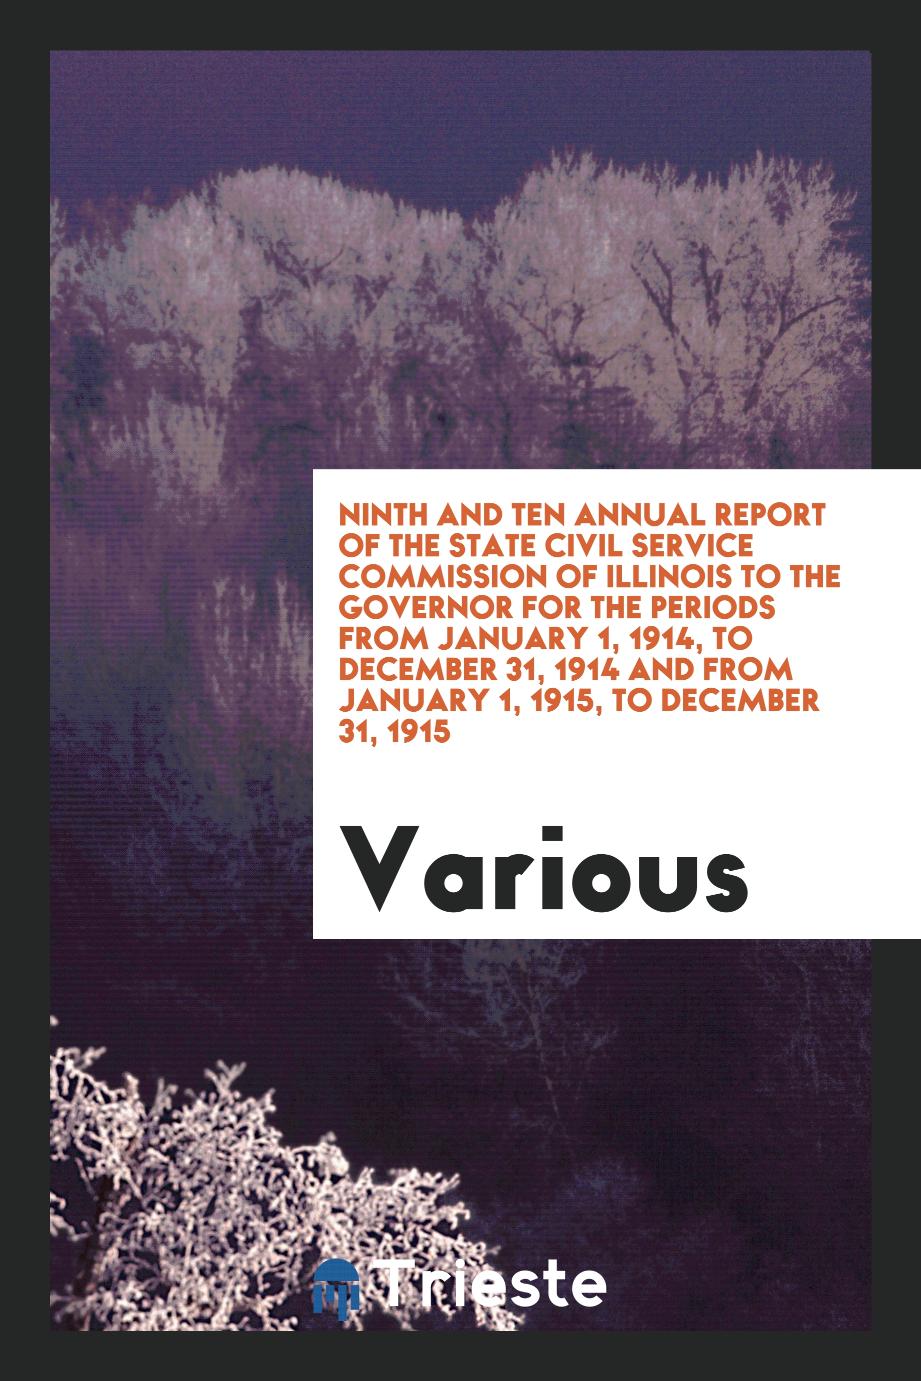 Ninth and Ten Annual Report of the State Civil Service Commission of Illinois to the Governor for the Periods from January 1, 1914, to December 31, 1914 and from January 1, 1915, to December 31, 1915